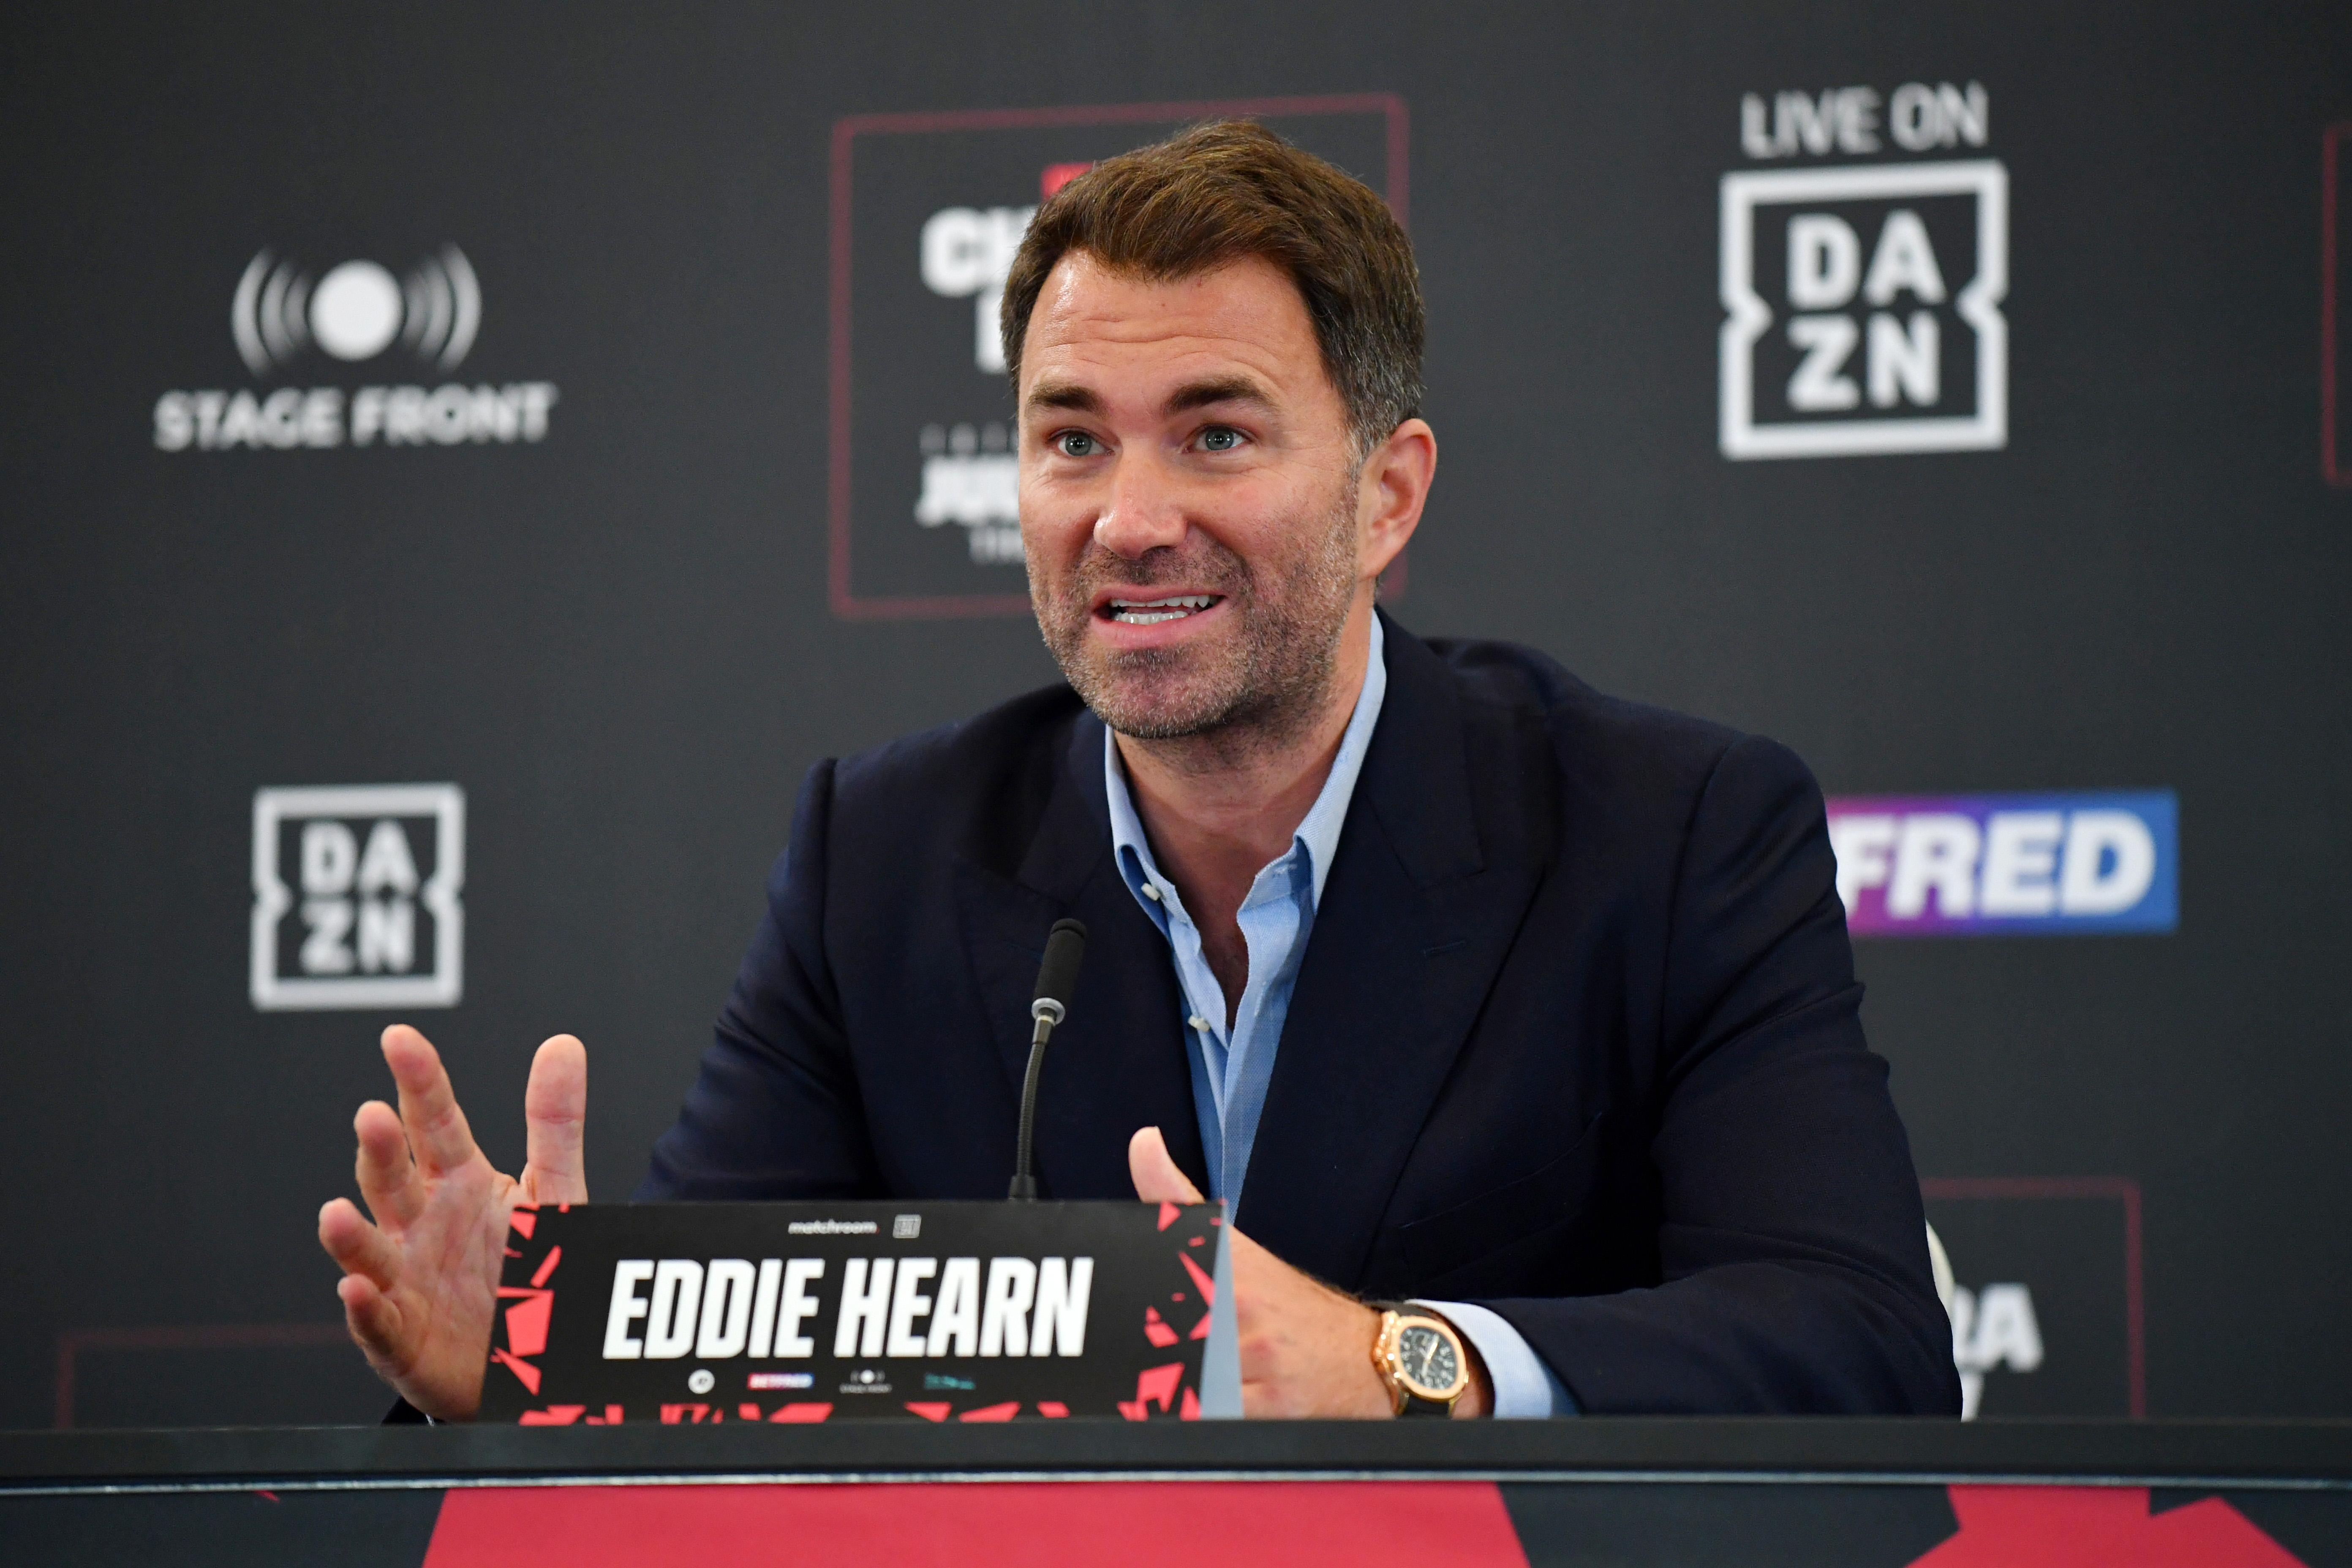 Eddie Hearn wants to leave his mark in boxing, and says conforming isn’t the way to do it.